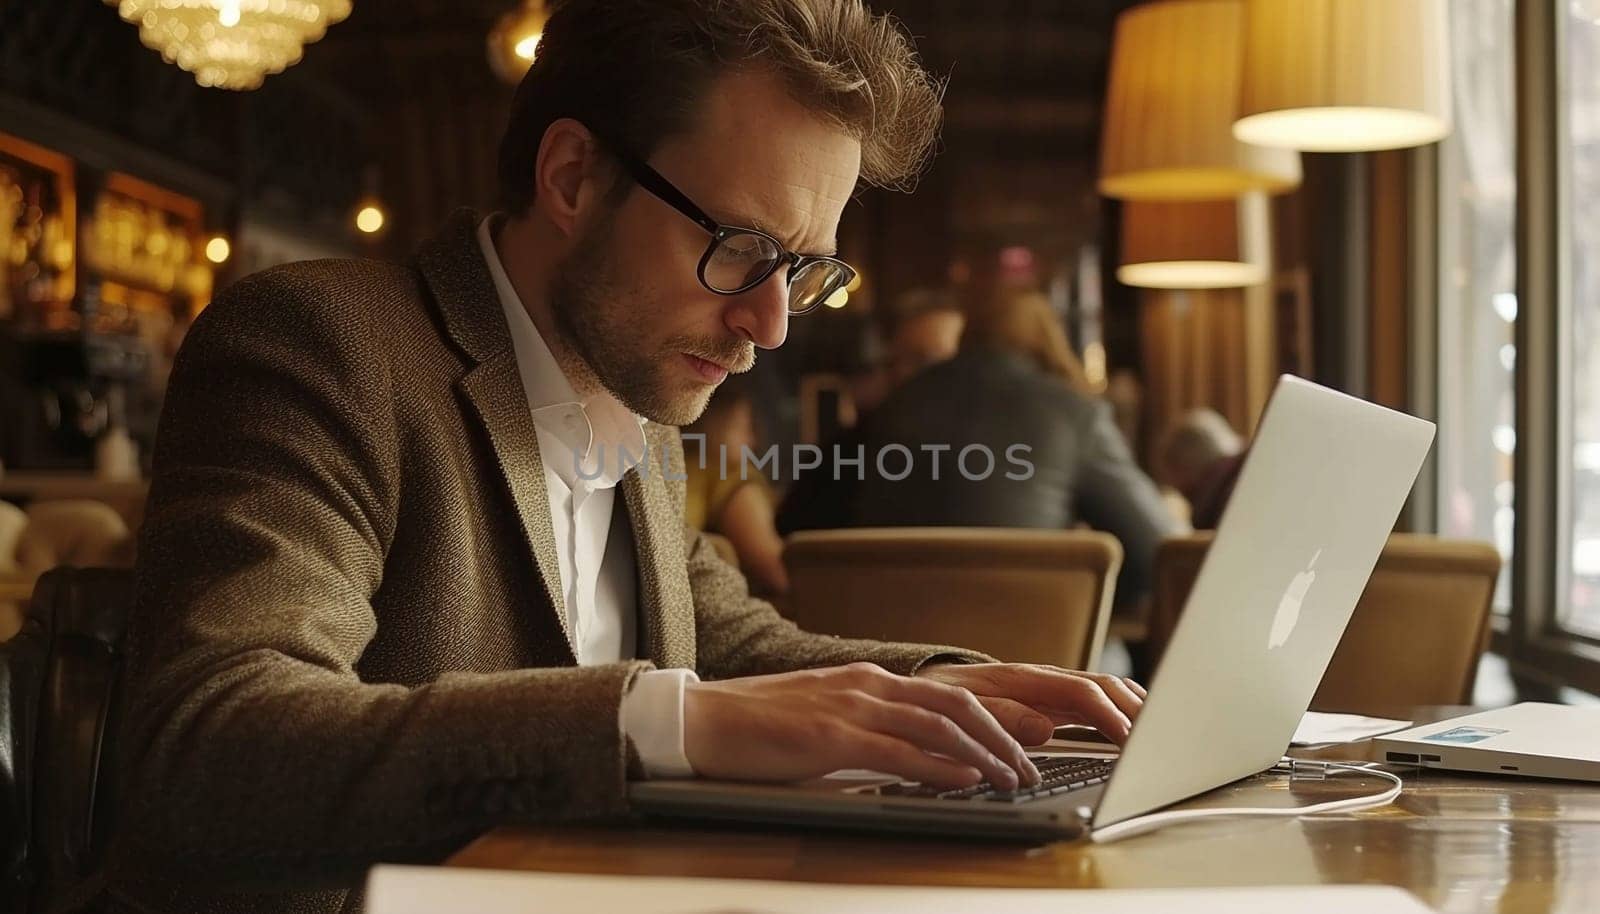 A man works for laptops in a cafe. Business environment. High quality photo